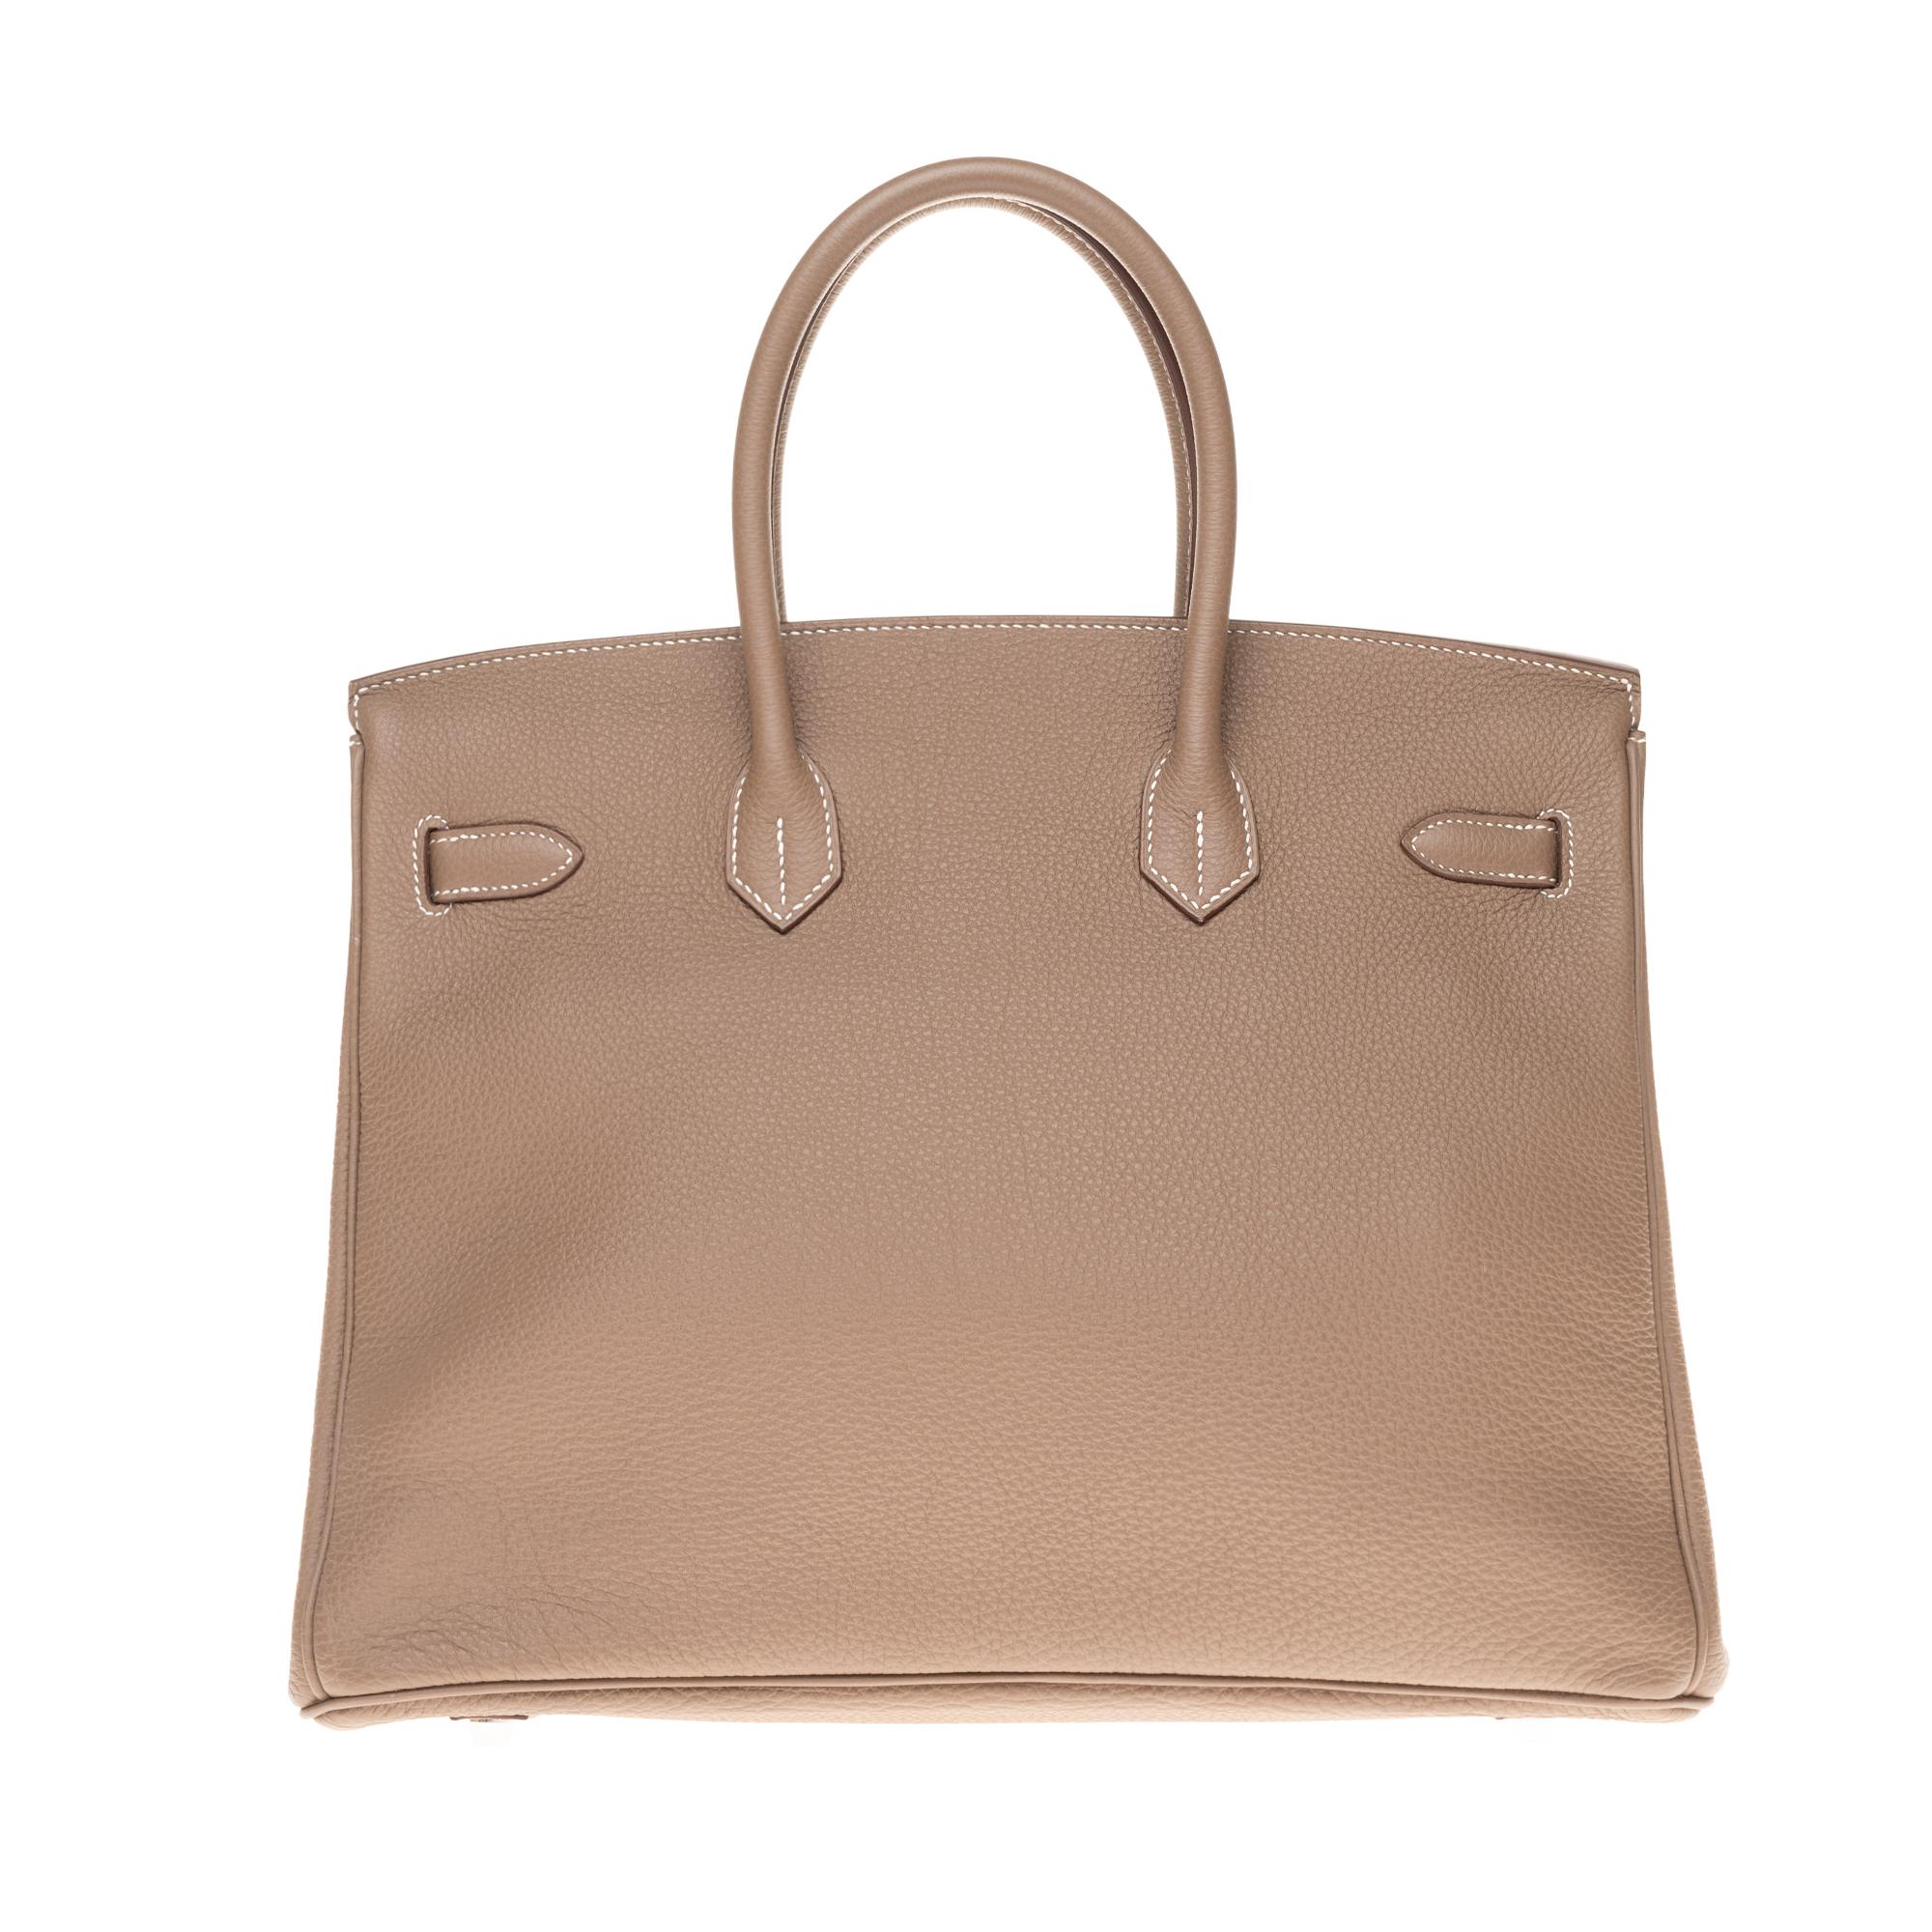 Stunning handbag Hermes Birkin 35 cm in Togo Etoupe leather, Silver metal trim, double handle in étoupe leather allowing a handheld.

Closure by flap.
Taupe leather inner lining, zip pocket, patch pocket.
Signature: 